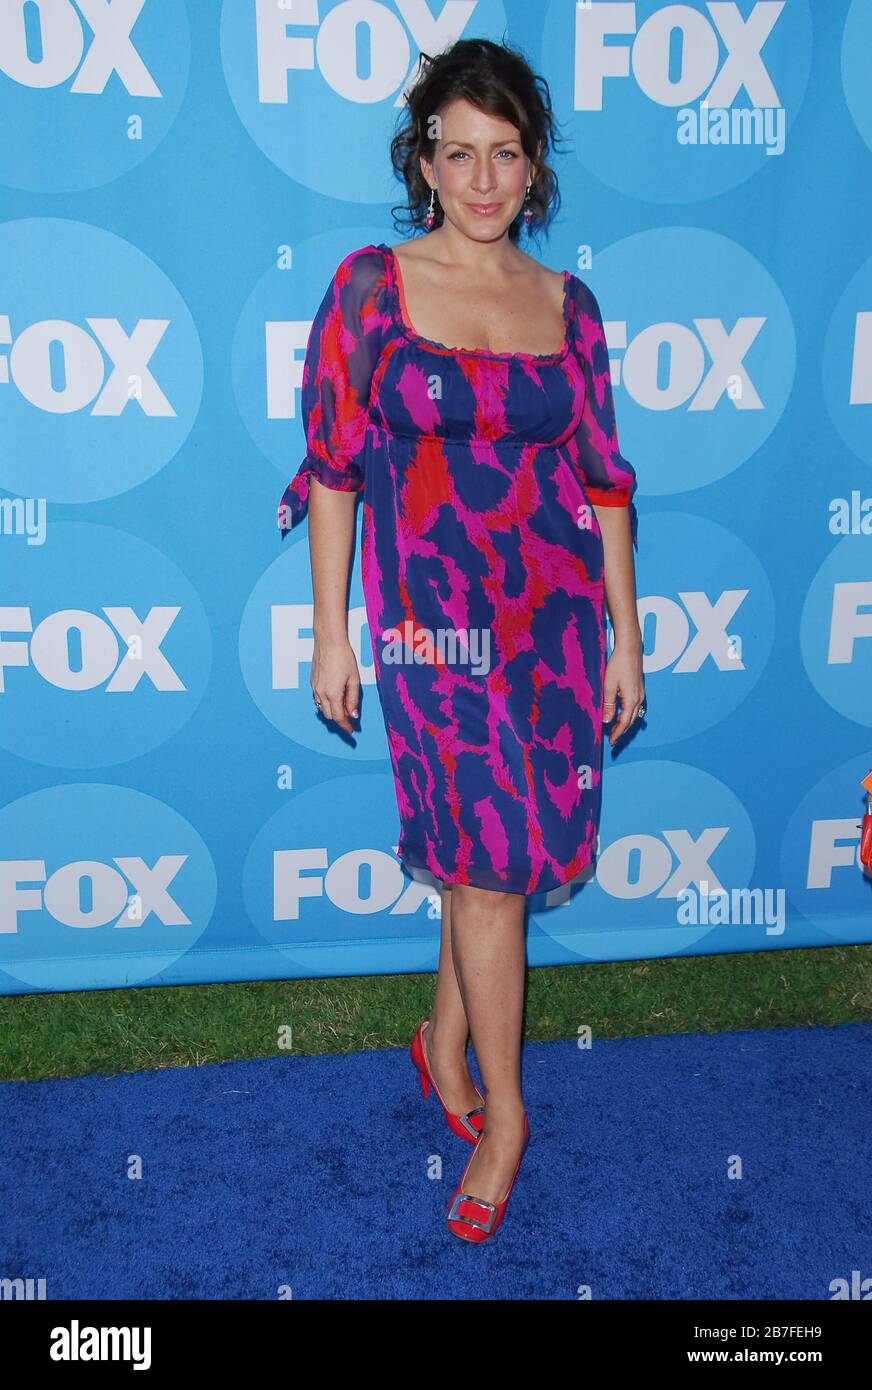 Joely Fisher at the FOX 2006 Summer TCA All Star Party held at the Ritz Carlton Huntington Hotel, Horseshoe Garden in Pasadena, CA. The event took place on Tuesday, July 25, 2006.  Photo by: SBM / PictureLux Stock Photo